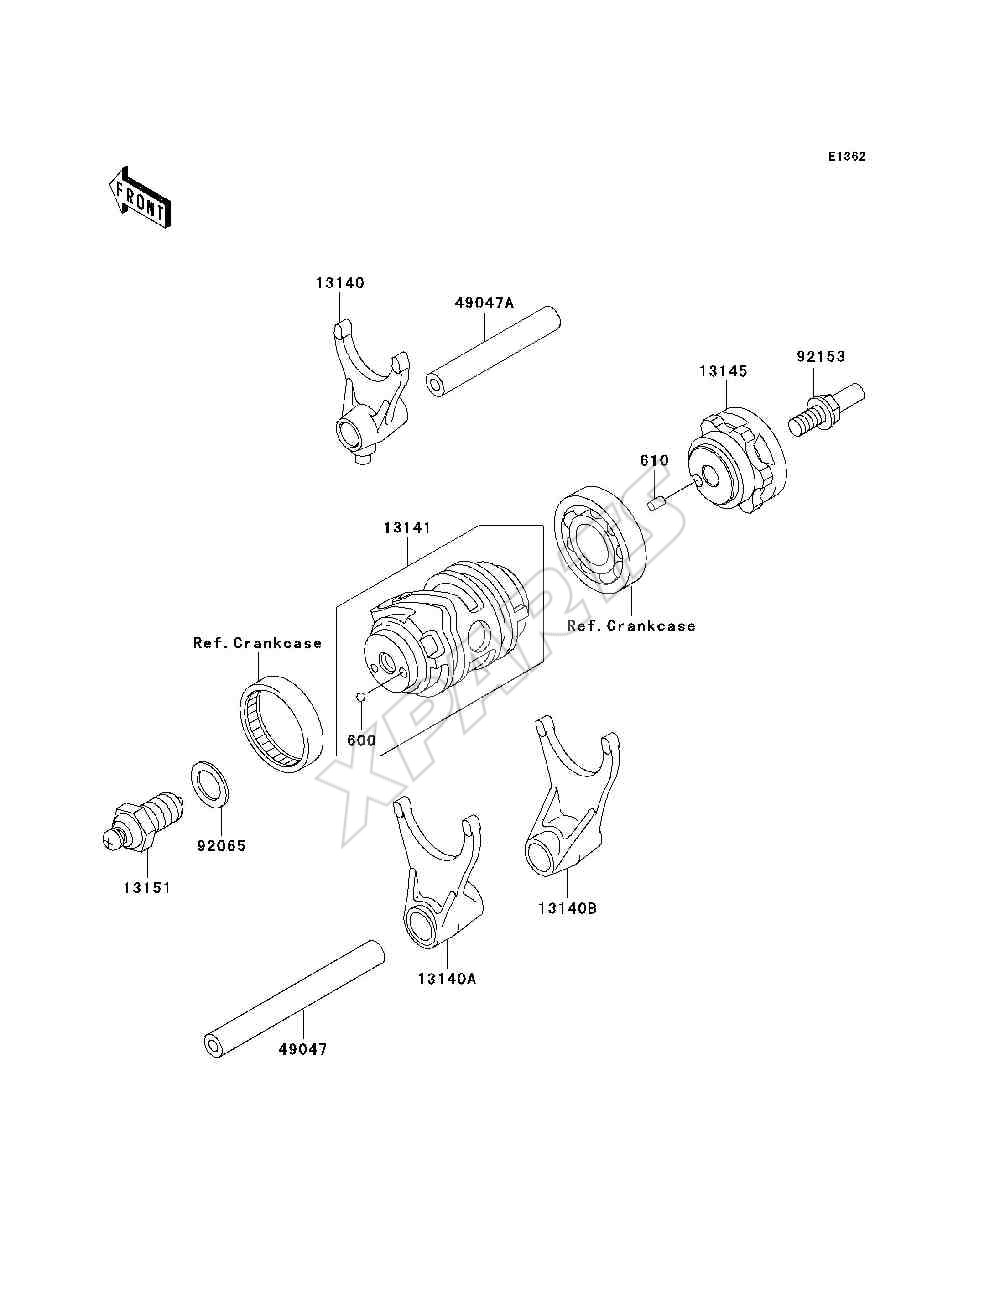 Picture for category Gear Change Drum / Shift Fork(s)